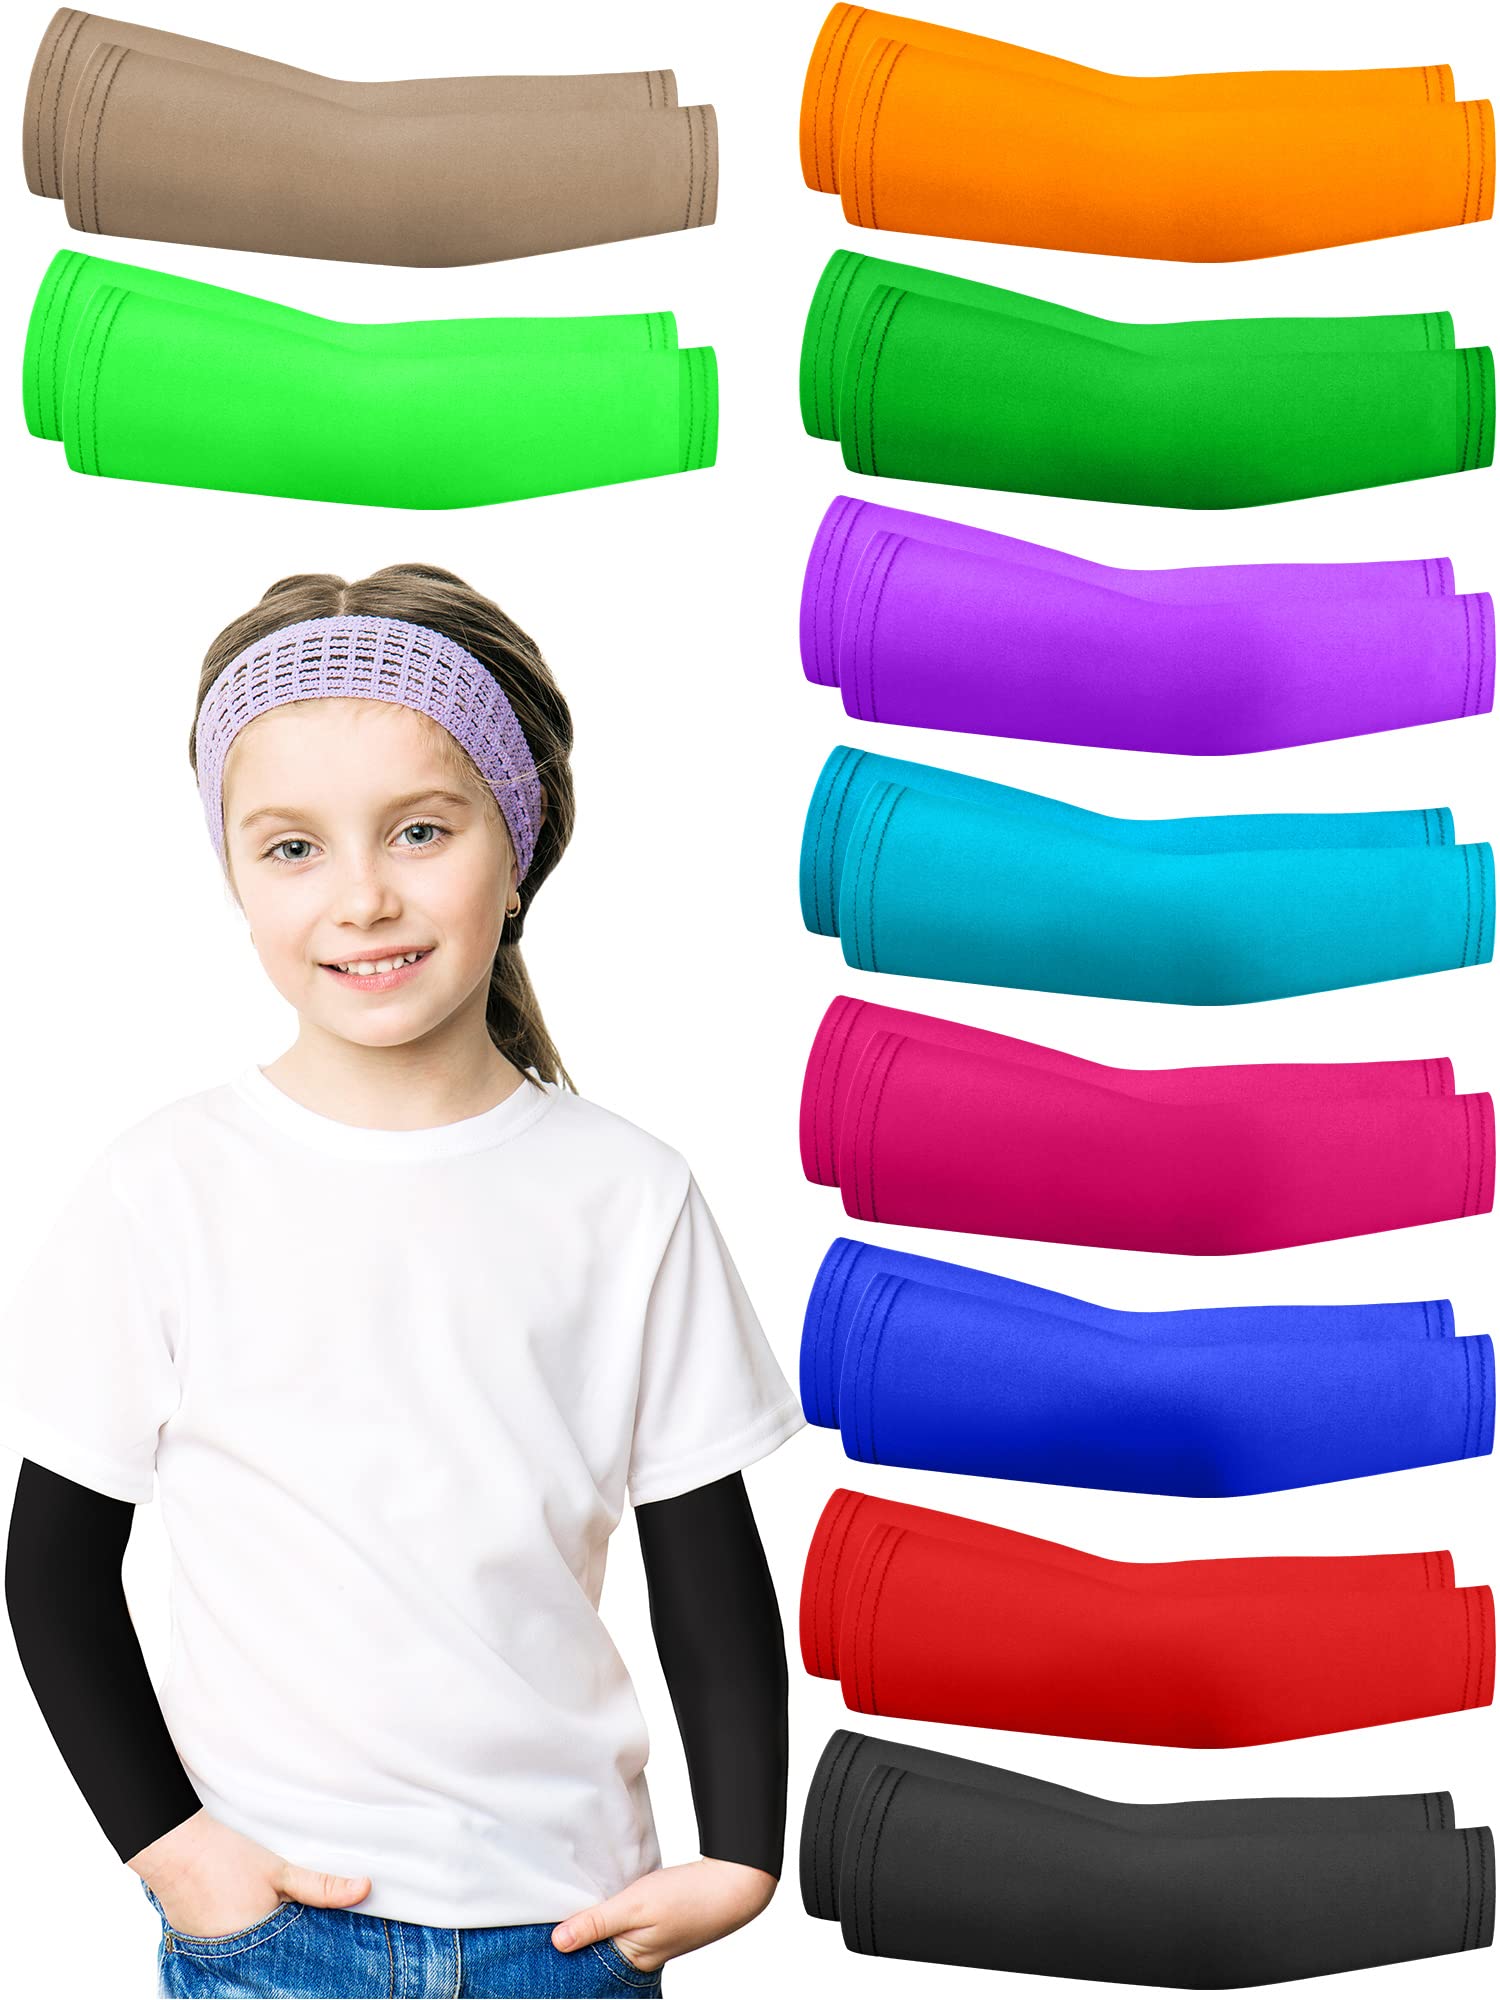 Geyoga 10 Pairs Kids Arm Sleeves Sun Protection Cooling UV Protection Sleeves Anti-slip Ice Silk Arm Covers for Boys and Girls (Mixed Colors, M Size)